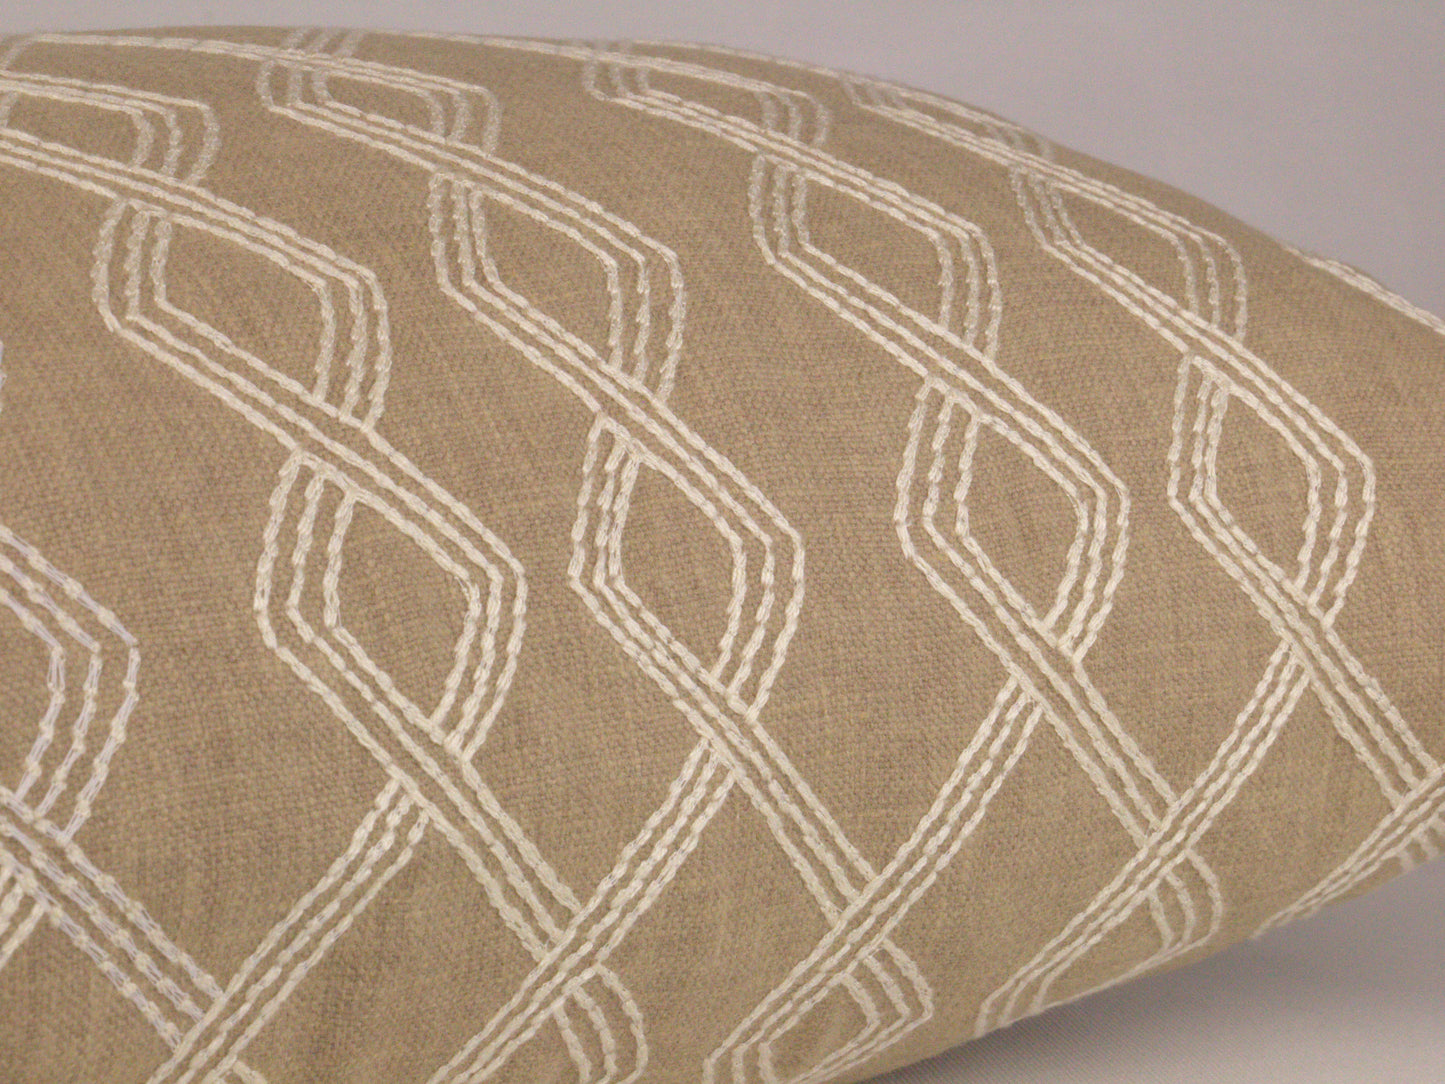 Beige Embroidered Long Lumbar Pillow Cover, 14x36"